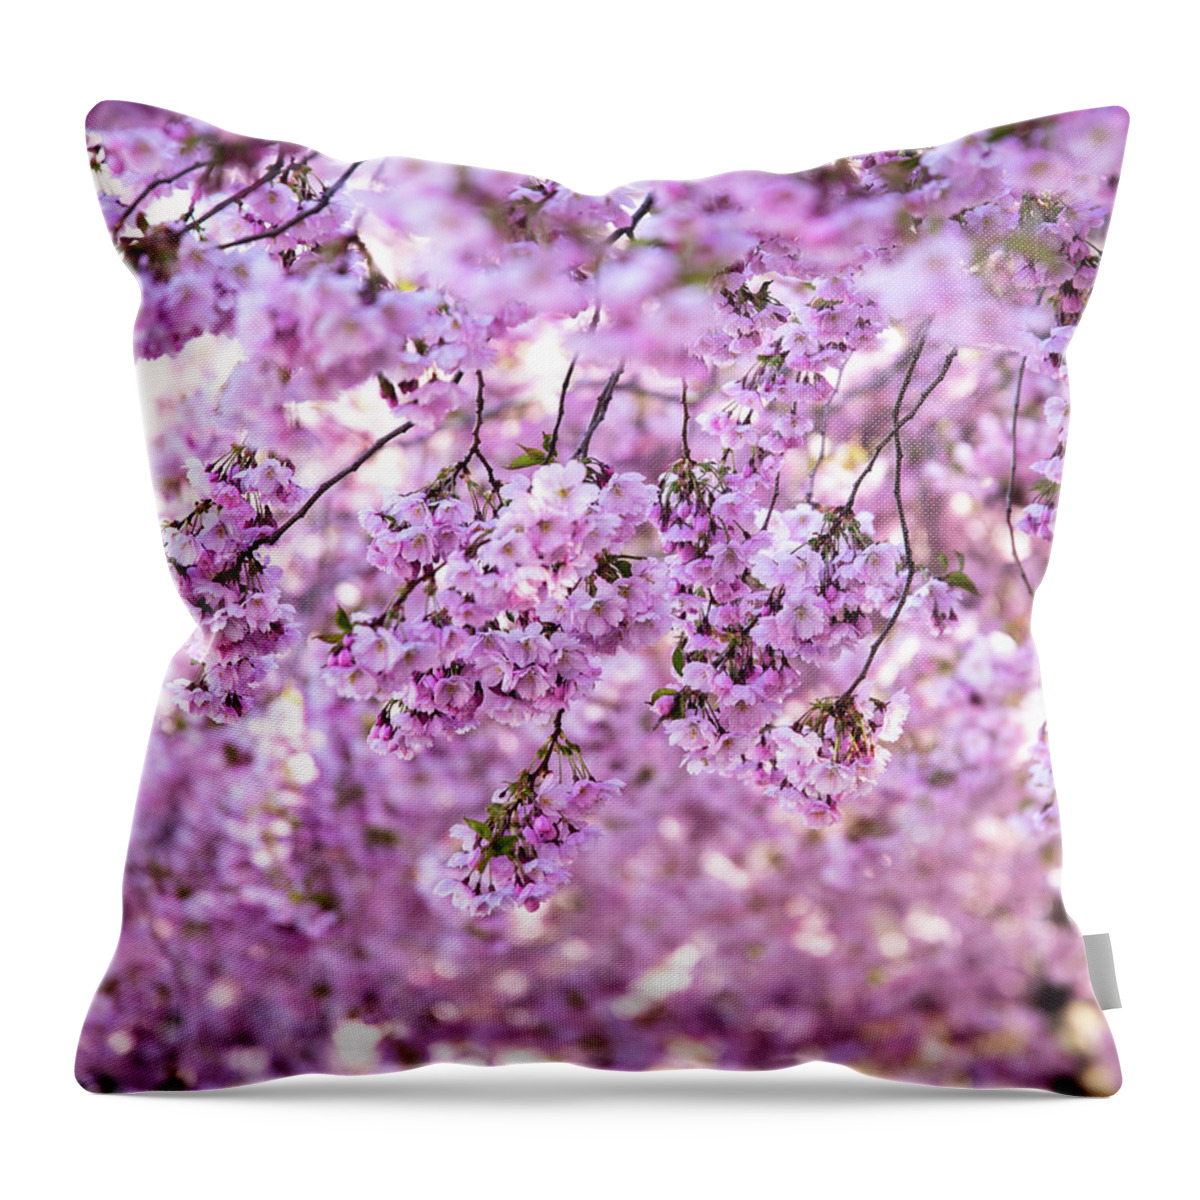 Cherry Throw Pillow featuring the photograph Cherry Blossom Flowers by Nicklas Gustafsson